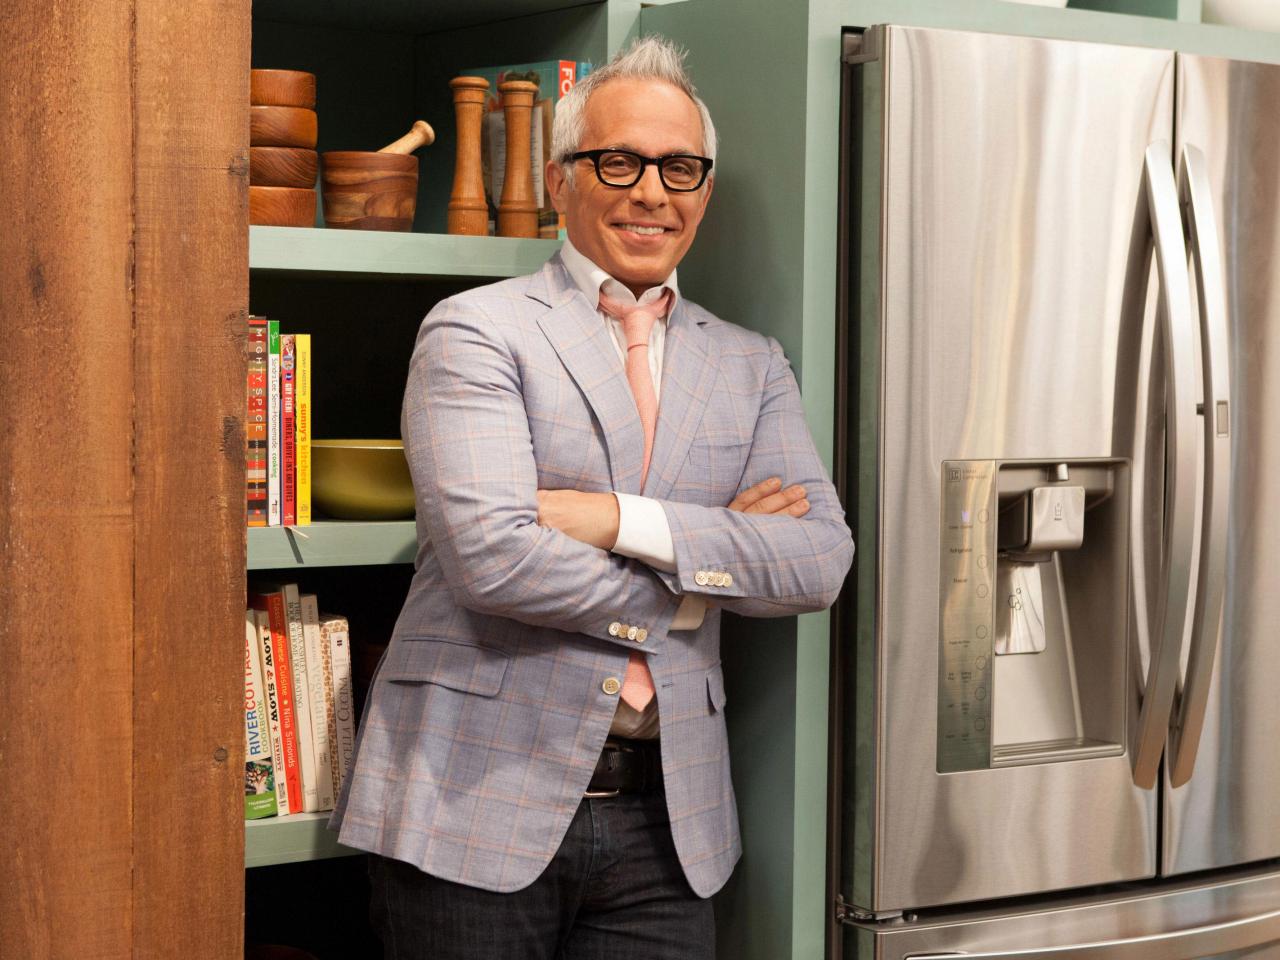 Then & Now: How Geoffrey Zakarian Changed Through The Years 